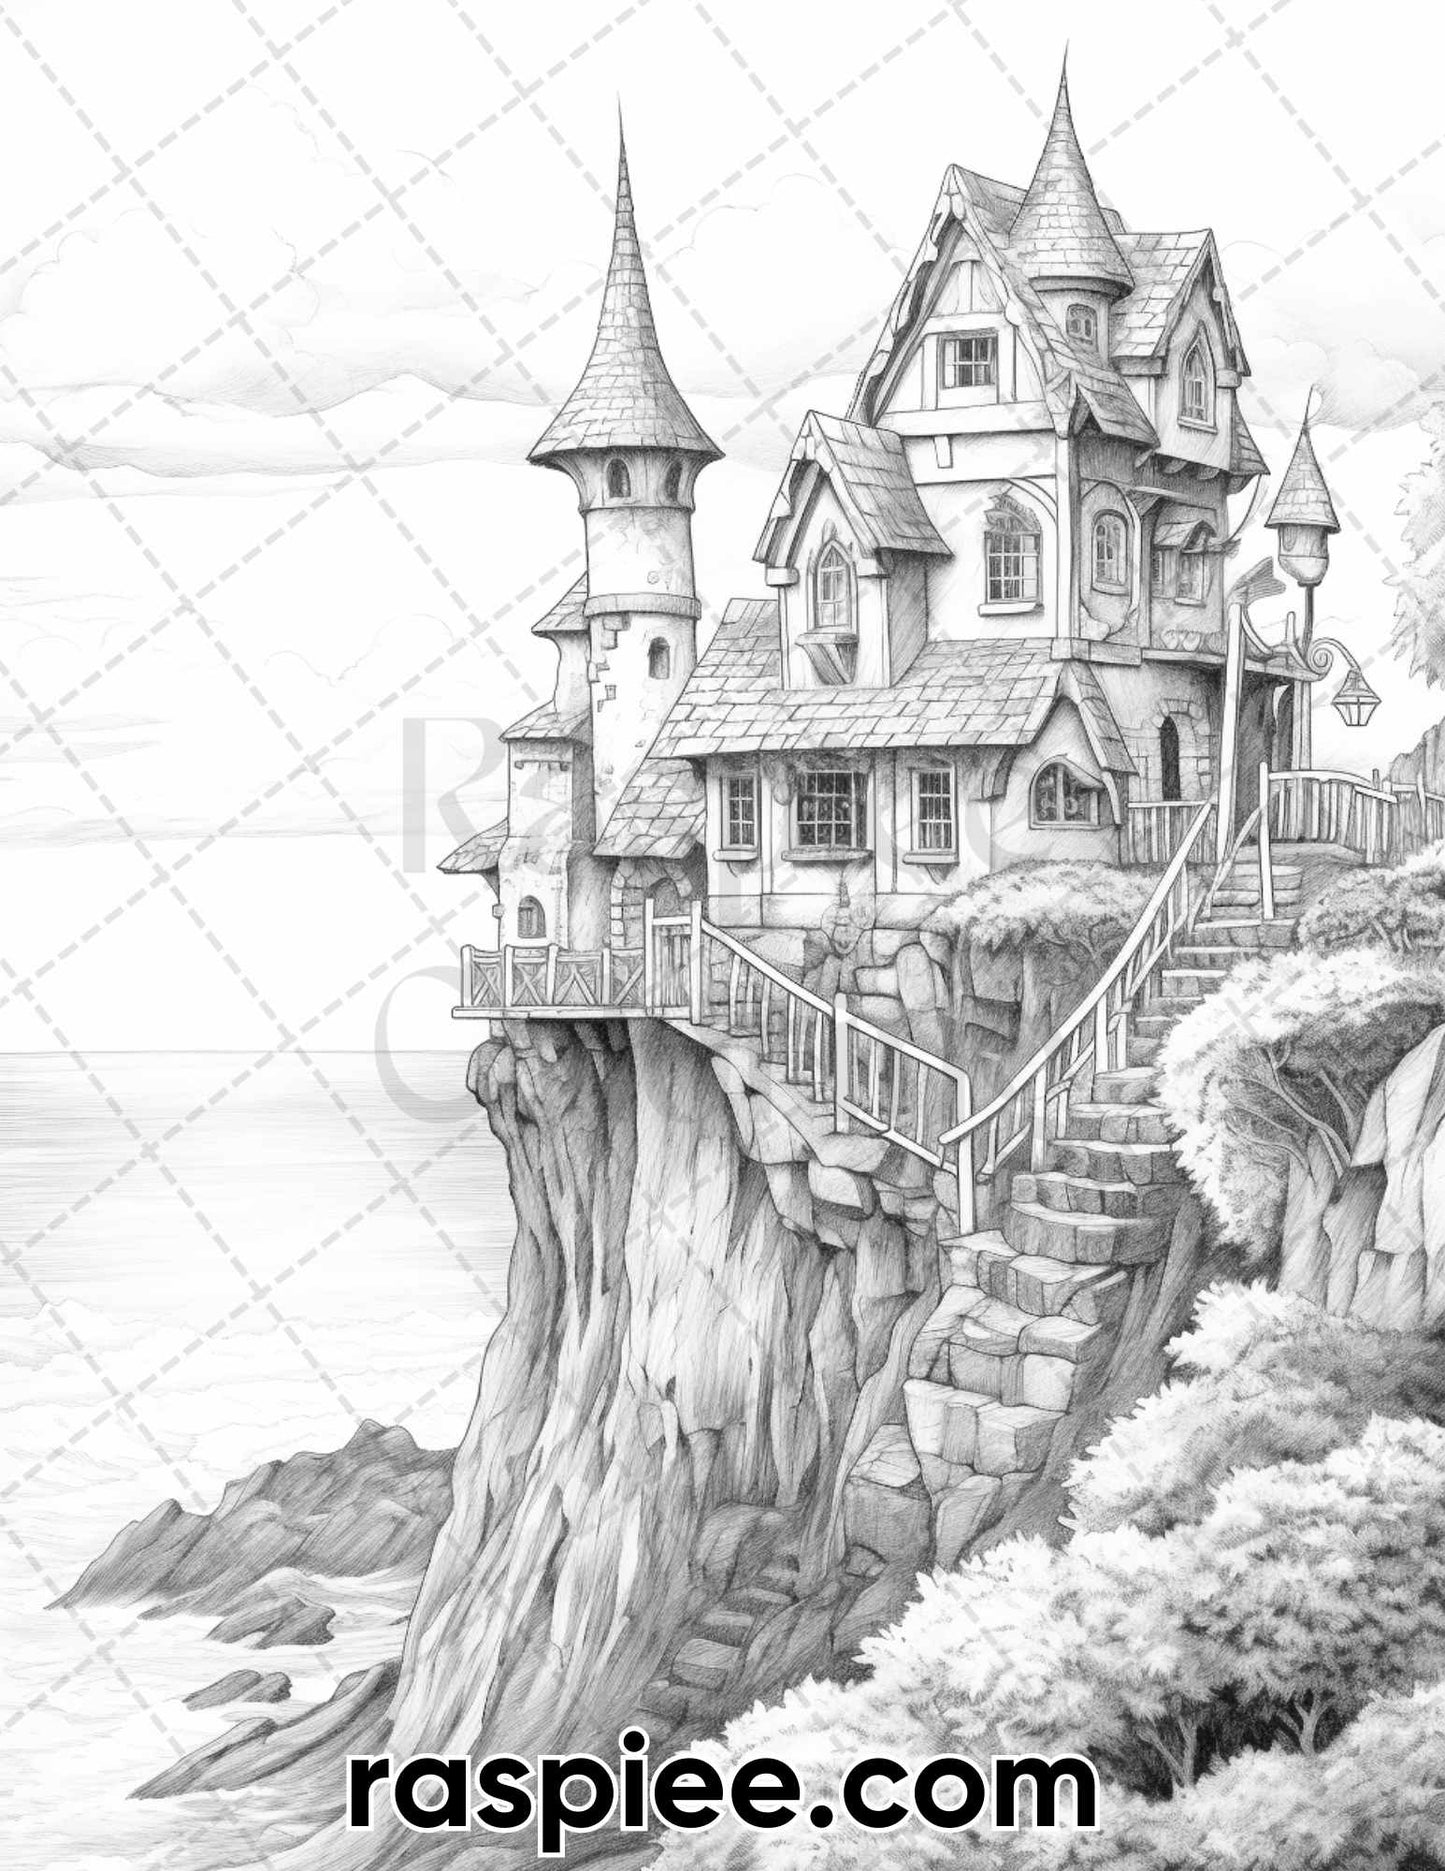 50 Fairy Beach Houses Grayscale Coloring Pages for Adults, Printable PDF Instant Download